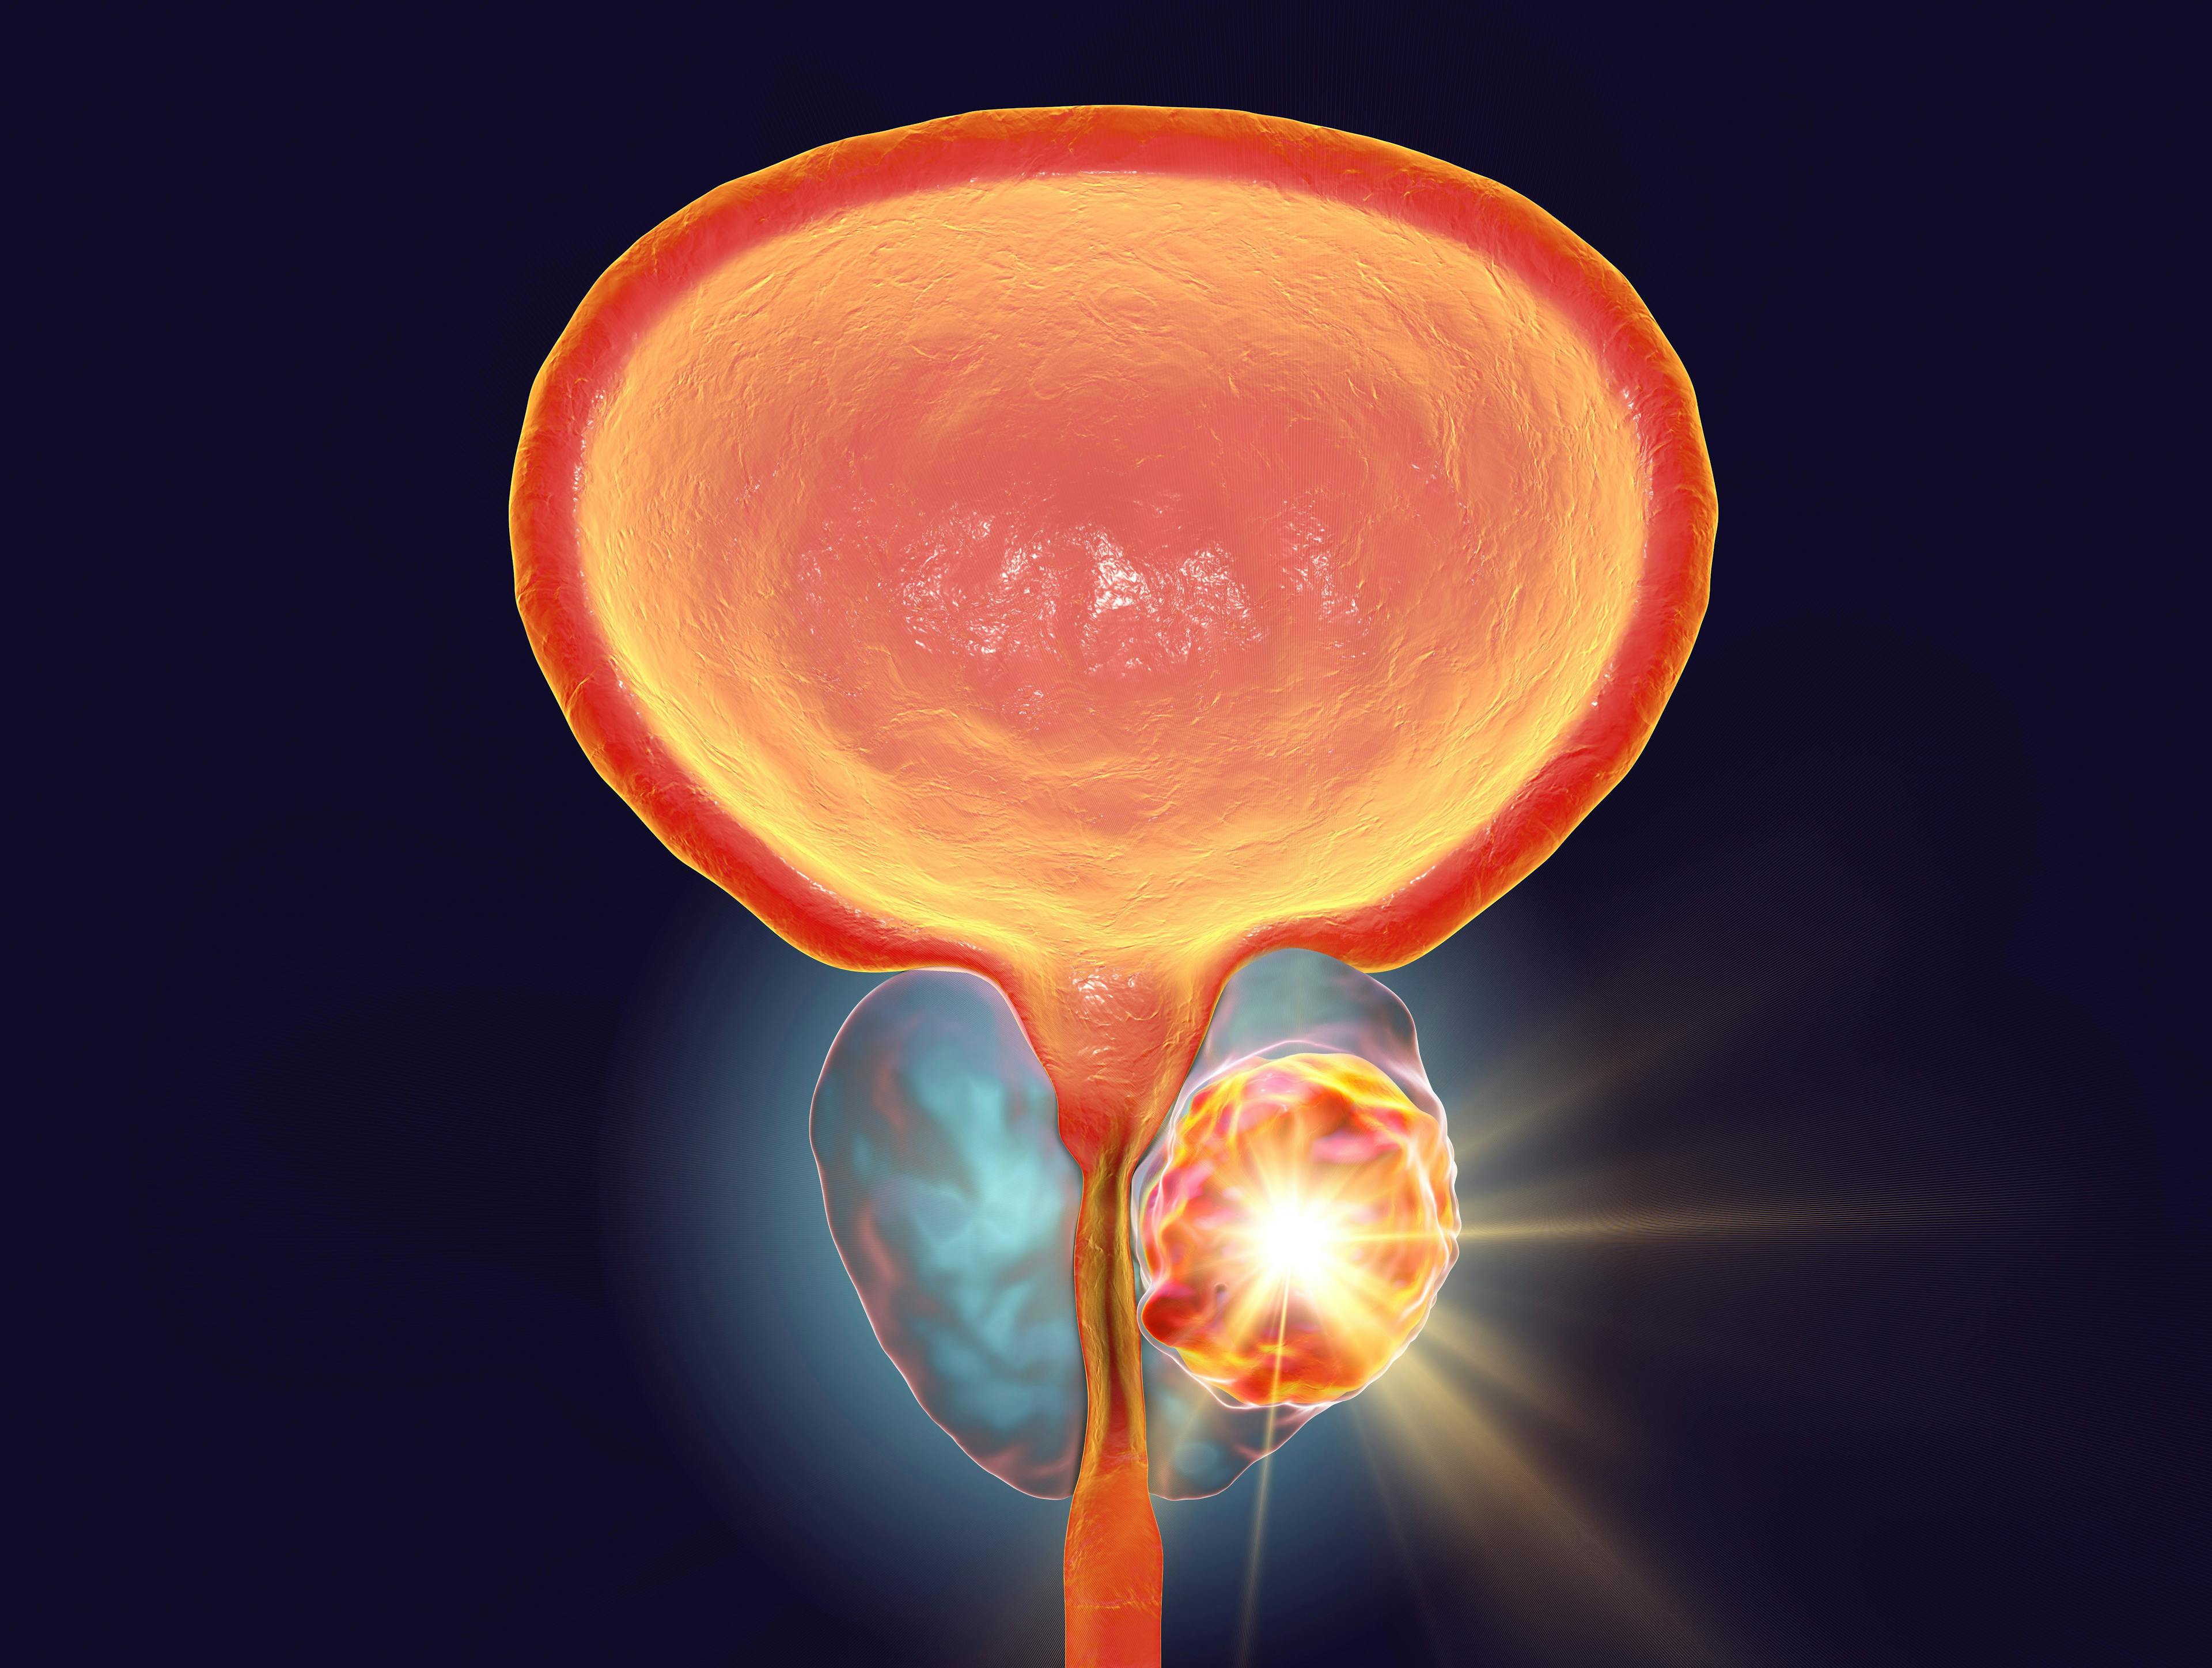 Metachronous Low Disease Volume May Result in Better Prostate Cancer Prognosis | Image Credit: © Dr_Microbe - stock.adobe.com.